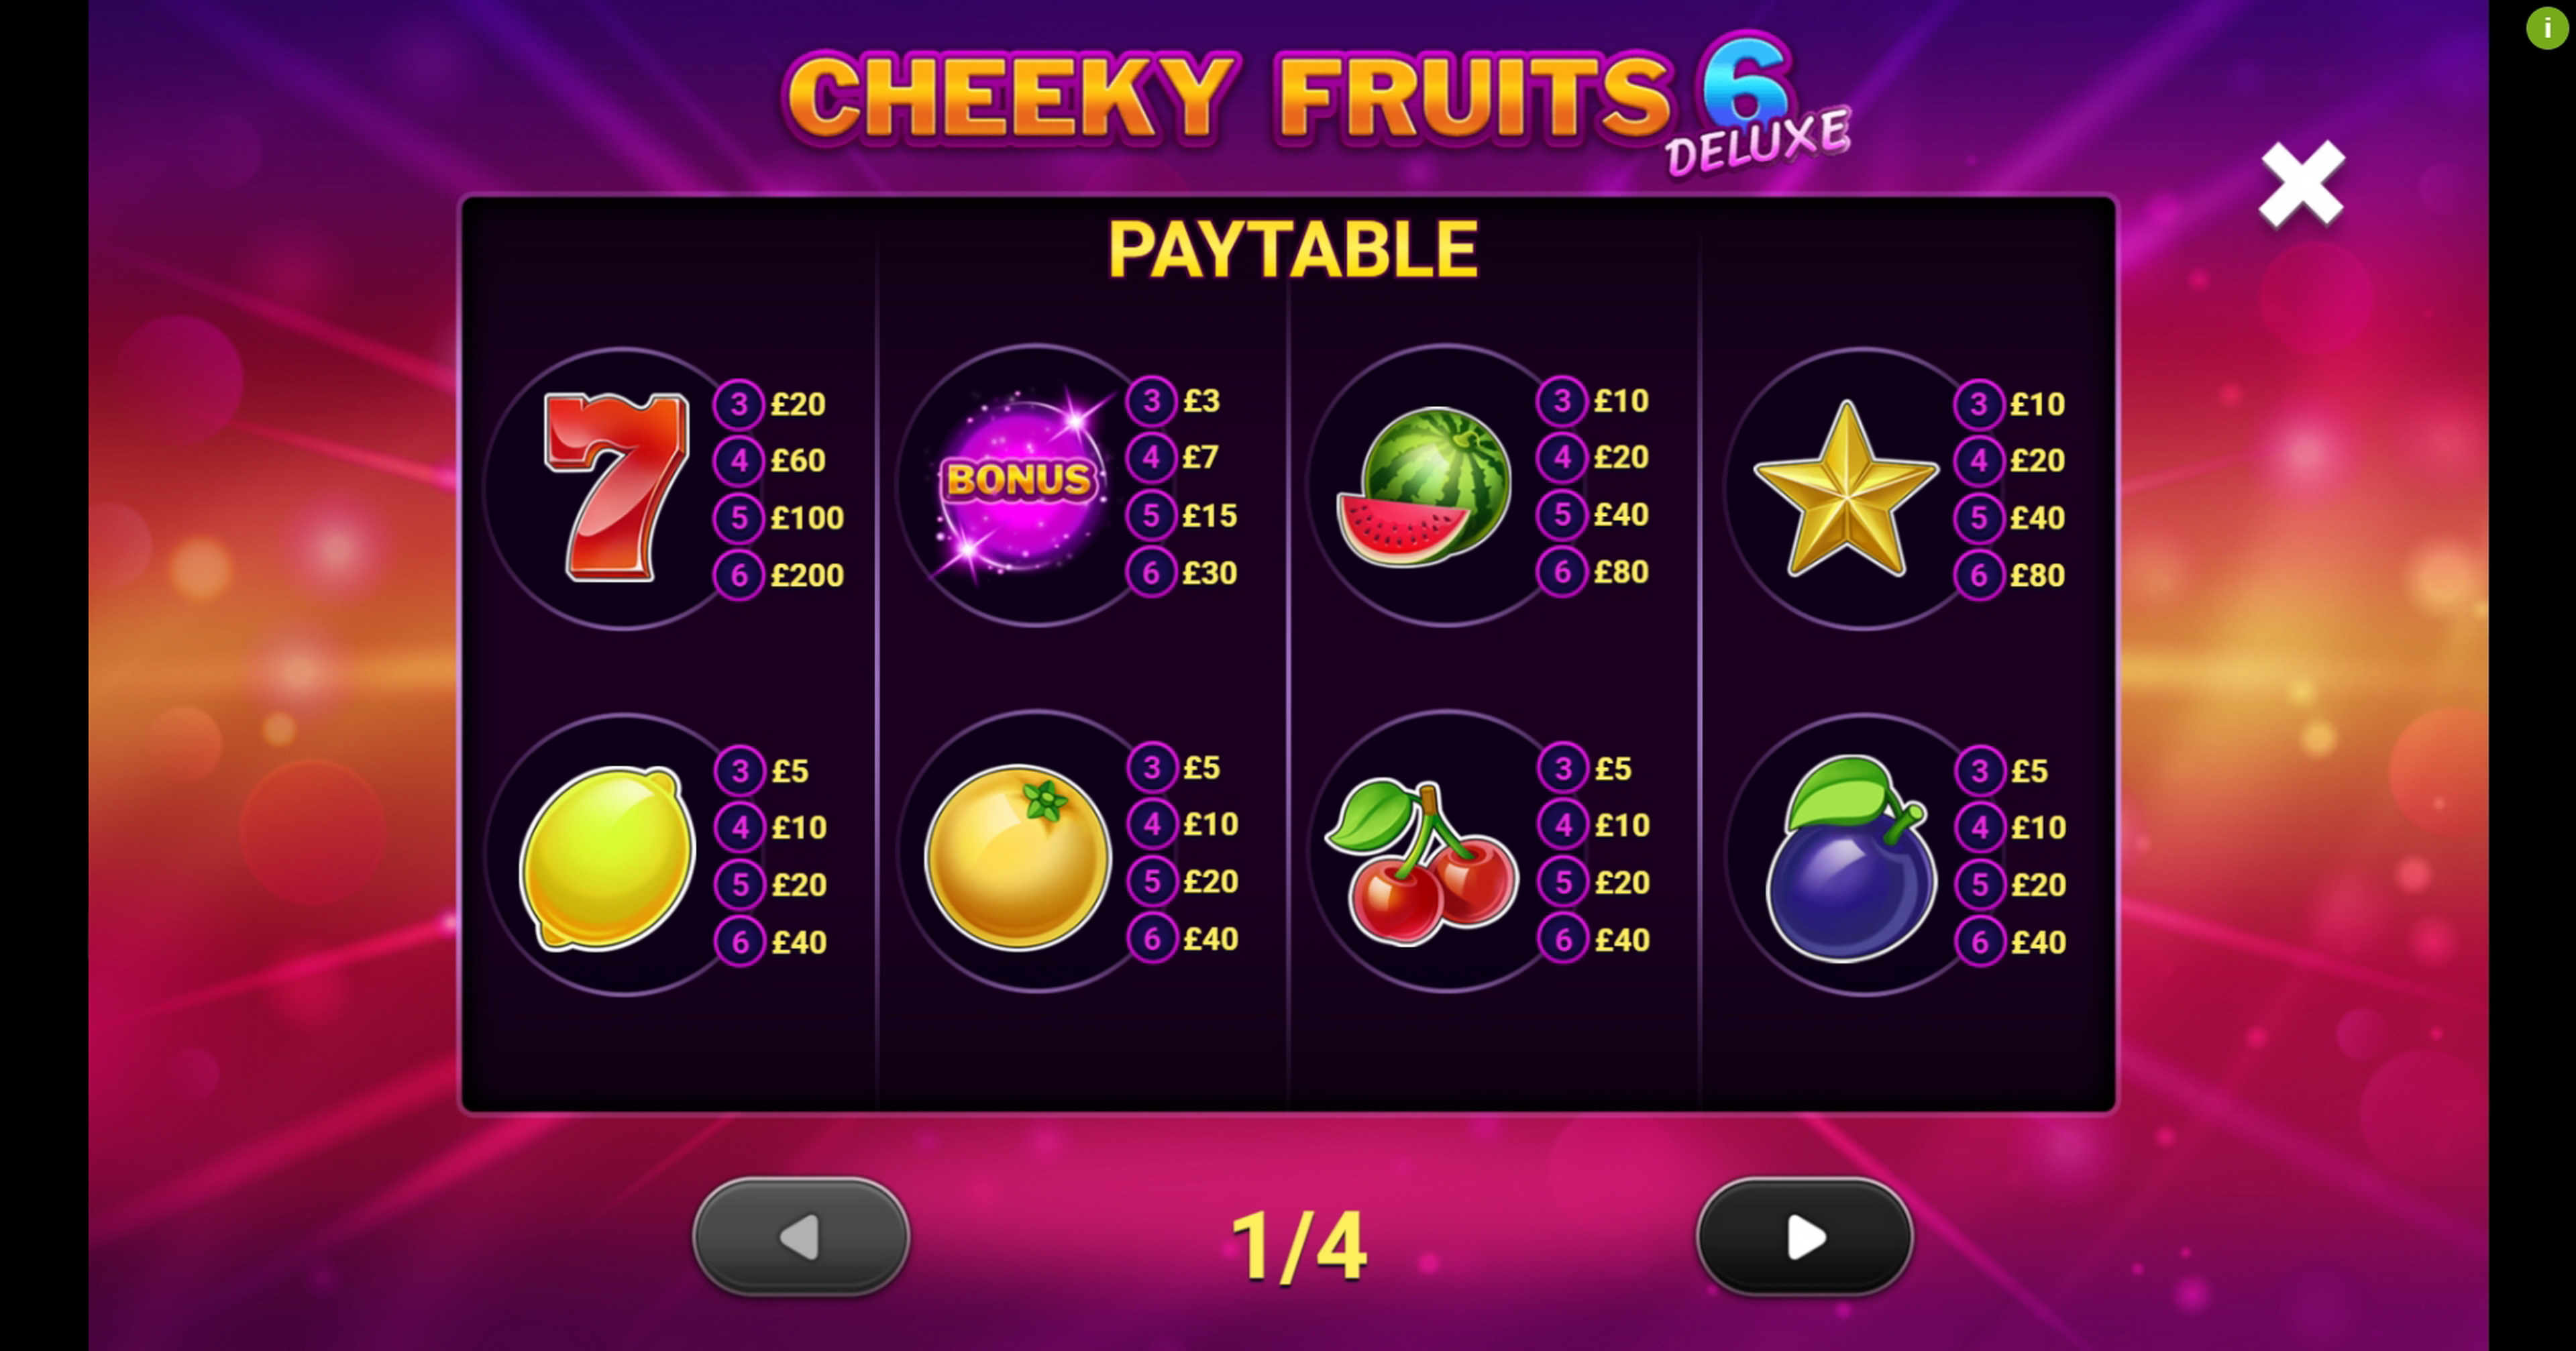 Info of Cheeky Fruits 6 Deluxe Slot Game by Gluck Games